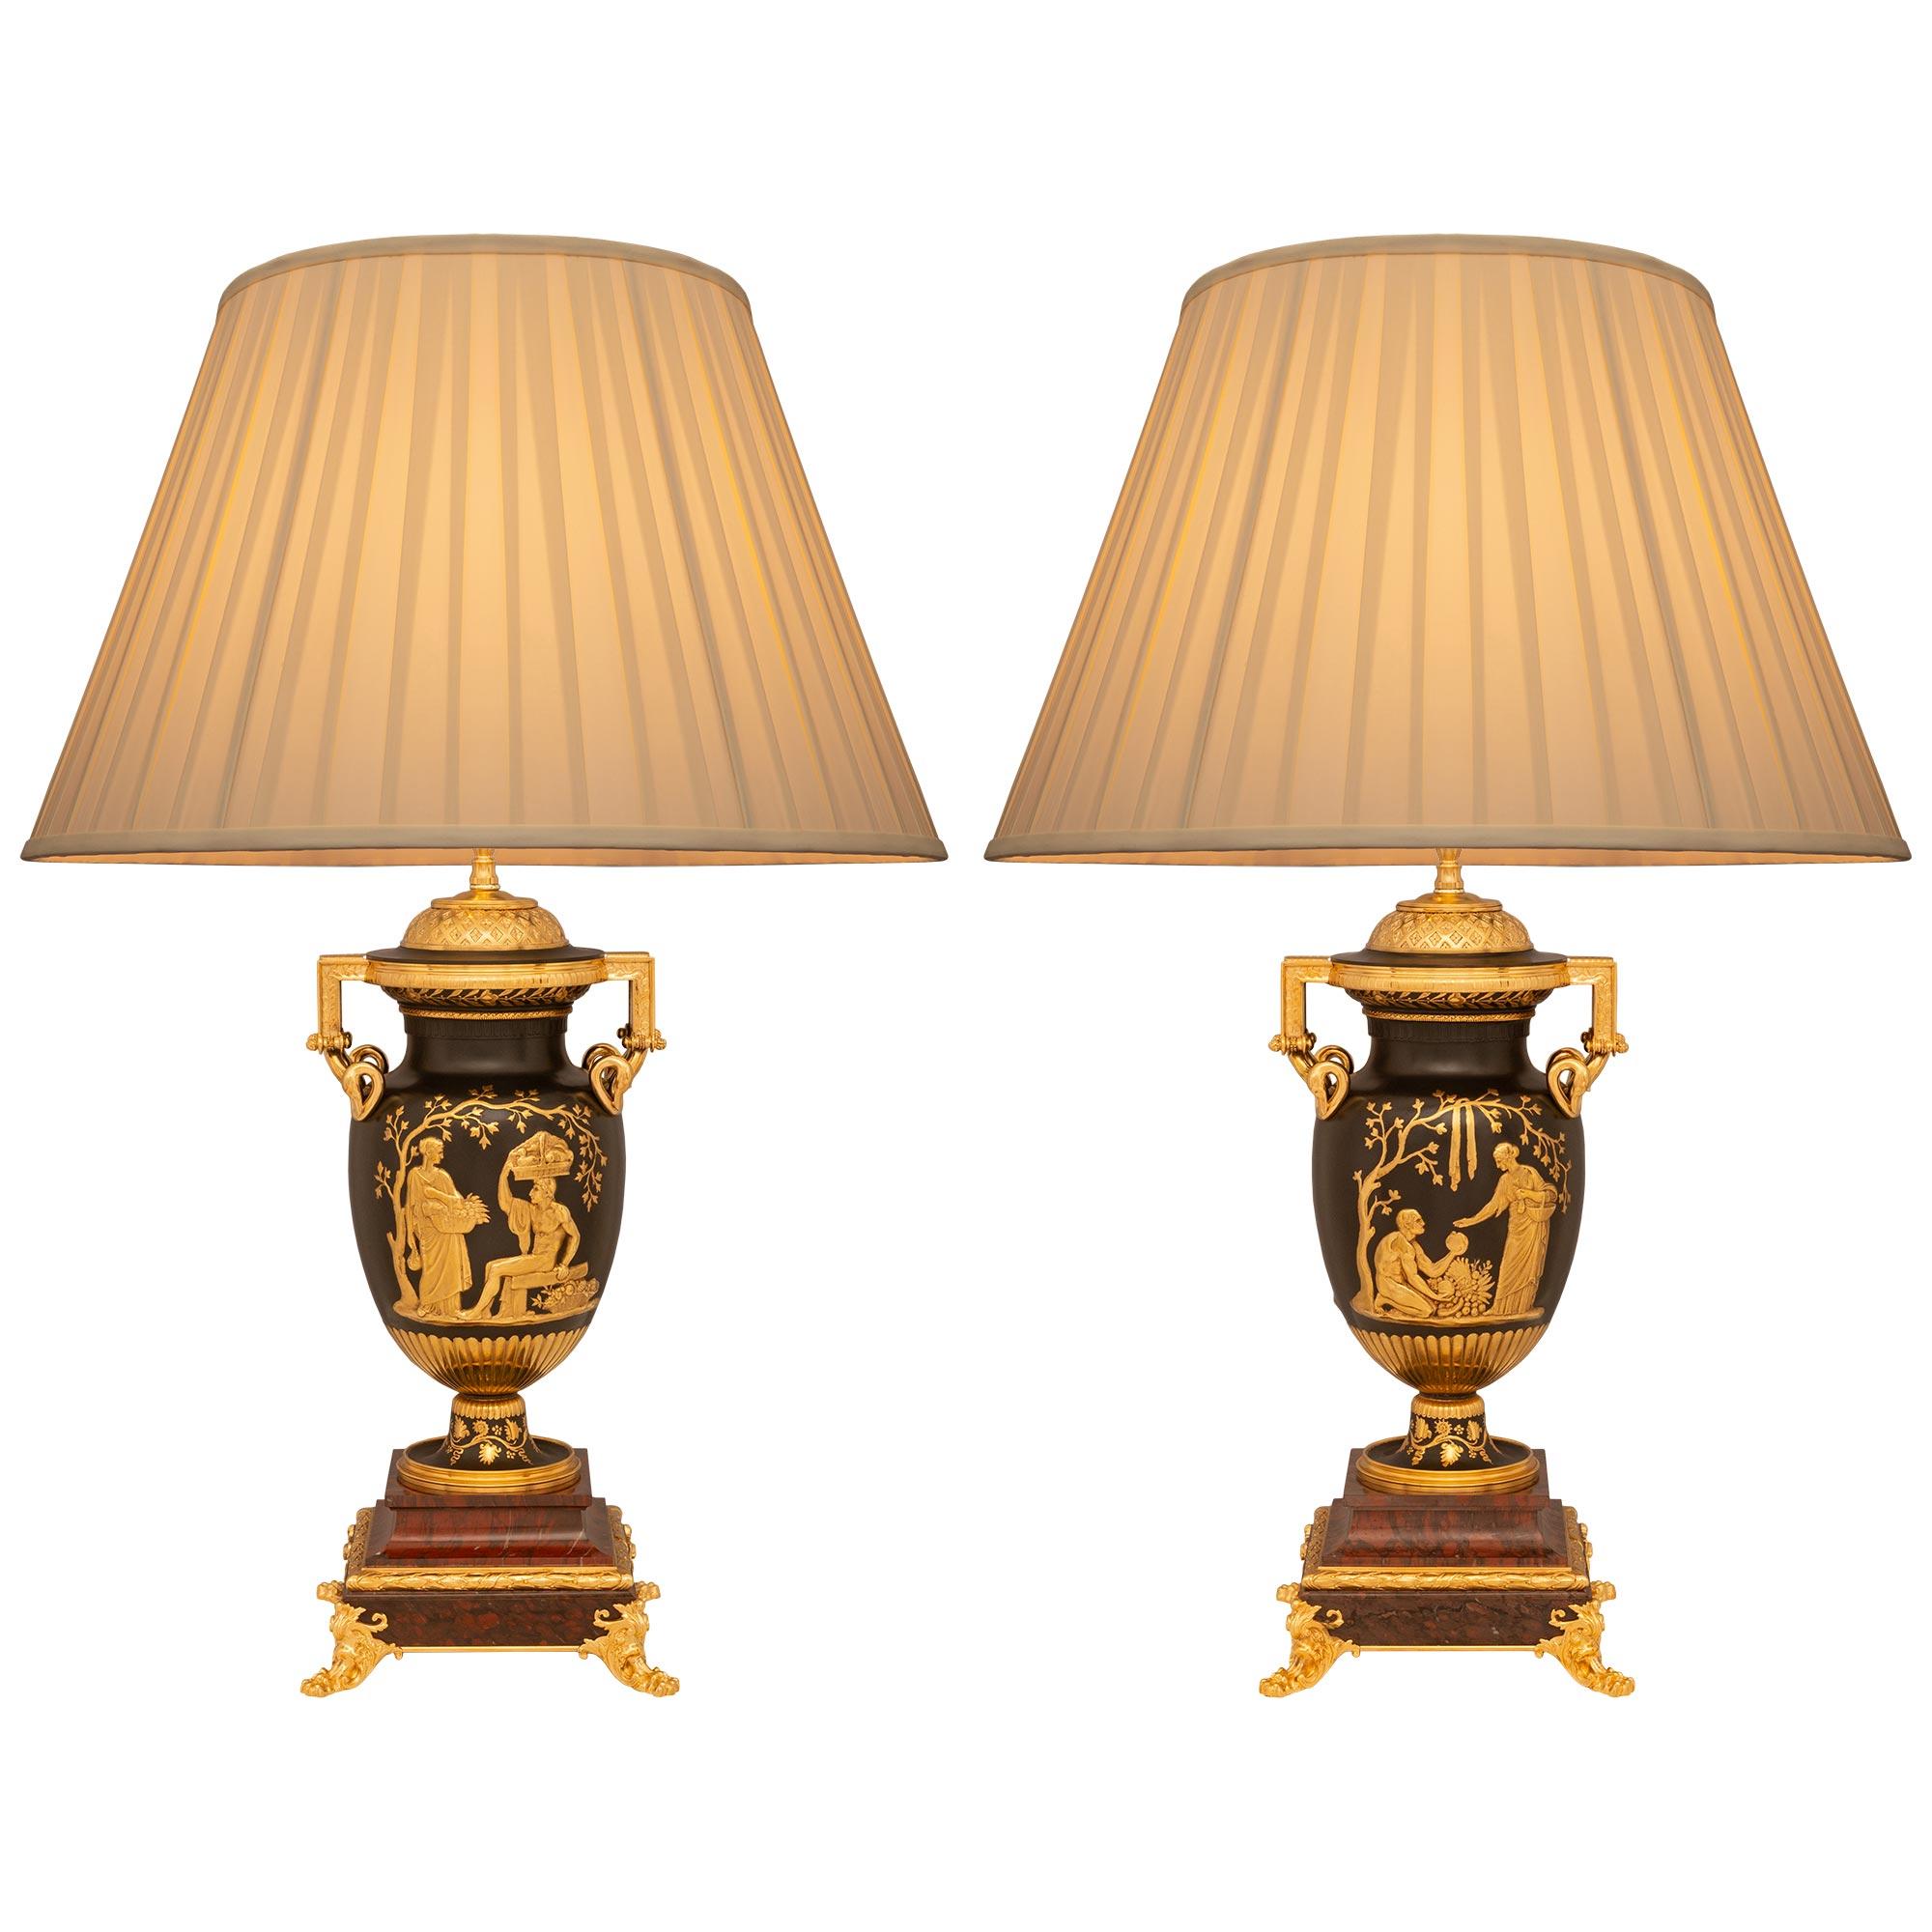 French 19th Century Belle Epoque Period Bronze And Ormolu Lamps For Sale 5